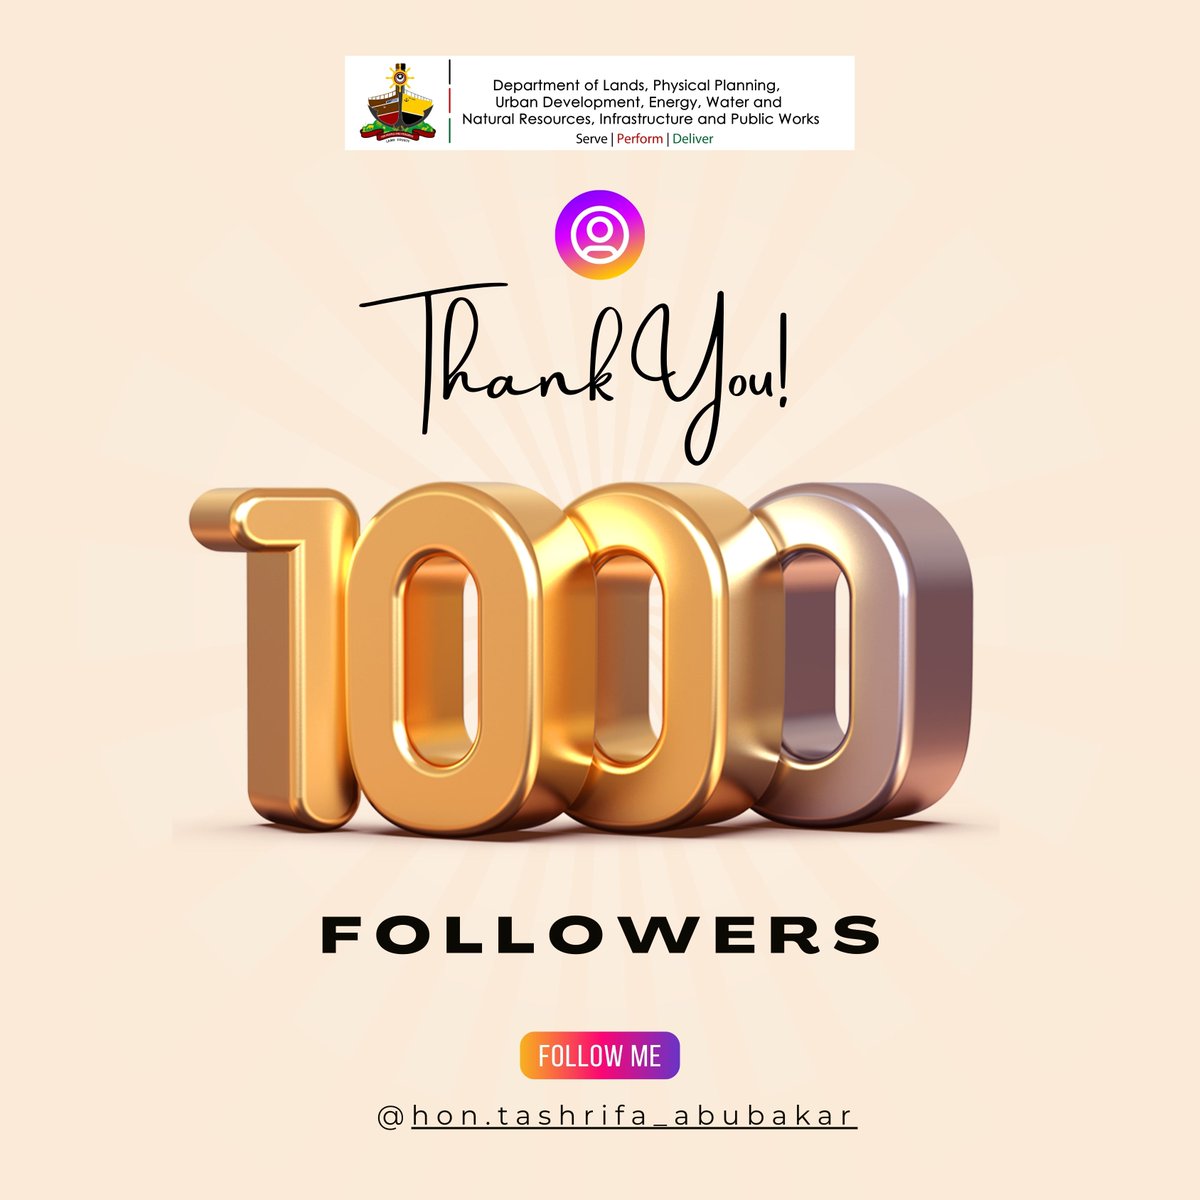 'Grateful for 1000 IG followers. 🎉 Your support keeps us inspired as we share updates on Lands, Urban Dev, Energy, Water, & more. Together, we're building a sustainable future. Thanks for being part of our journey! #ThankYou #CommunitySupport #Sustainability'